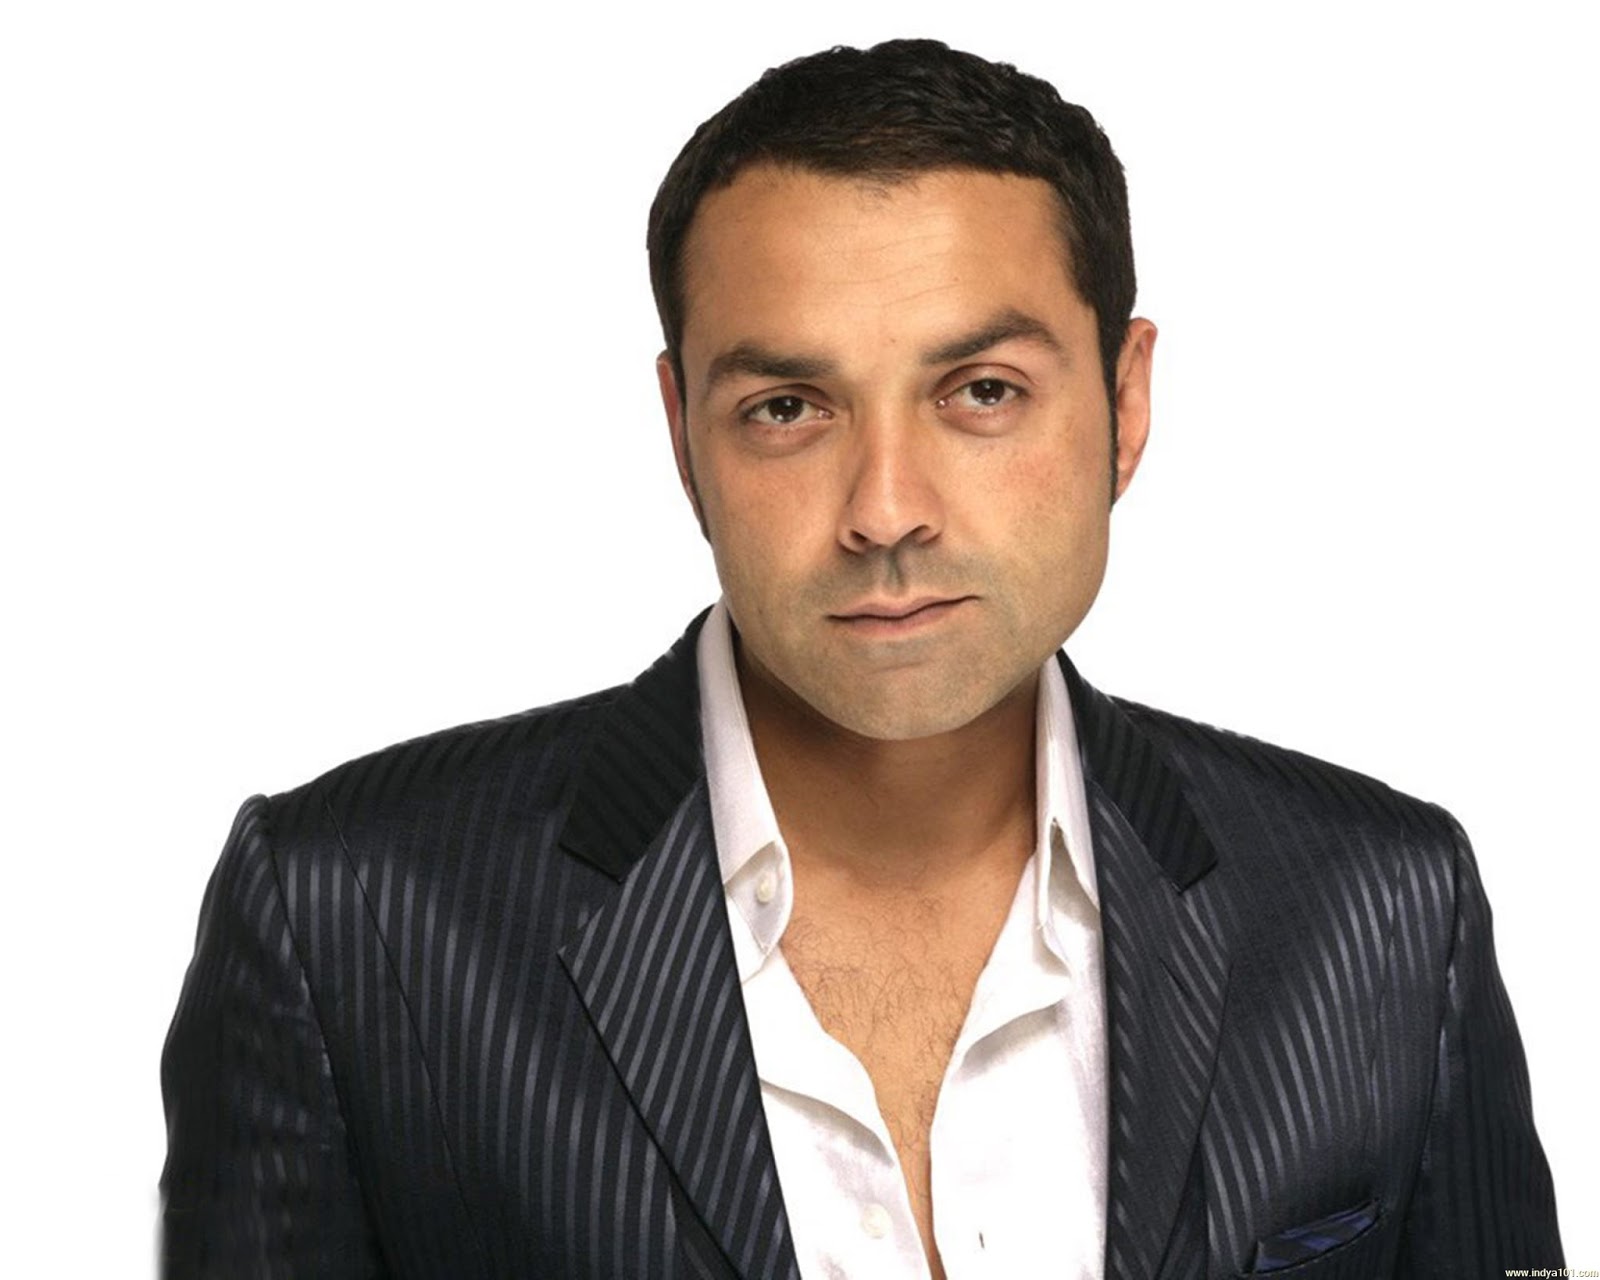 bobby deol wallpaper,white collar worker,chin,forehead,businessperson,suit